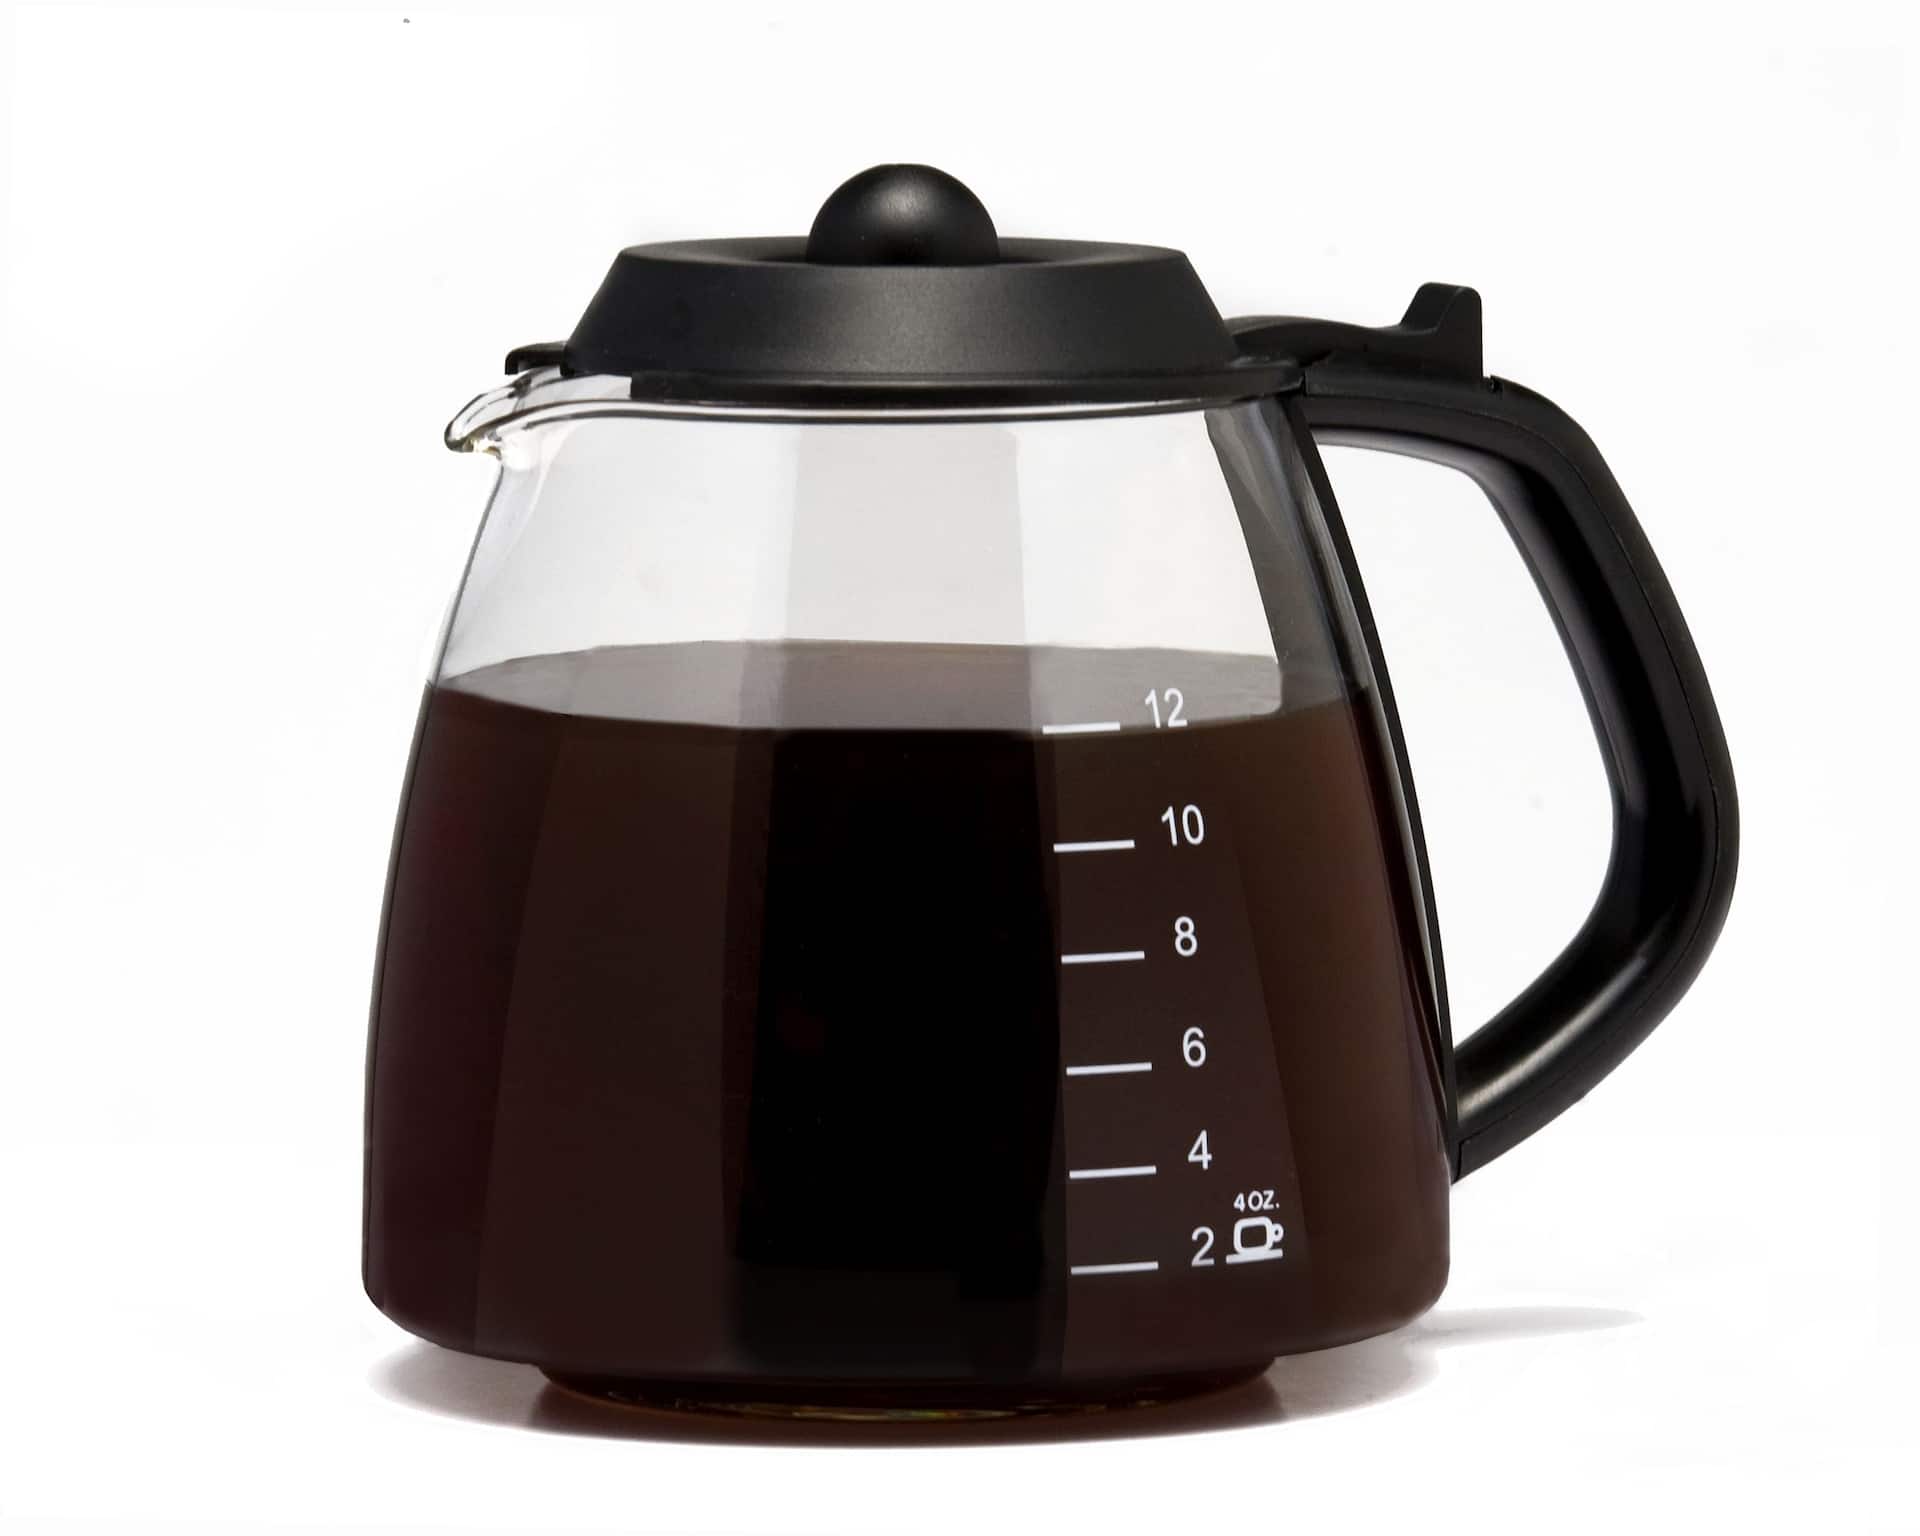 https://media-www.canadiantire.ca/product/living/kitchen/kitchen-appliances/0421720/universal-12-cup-coffee-carafe-164ba2d3-9b43-4add-acde-47f395ae60ba-jpgrendition.jpg